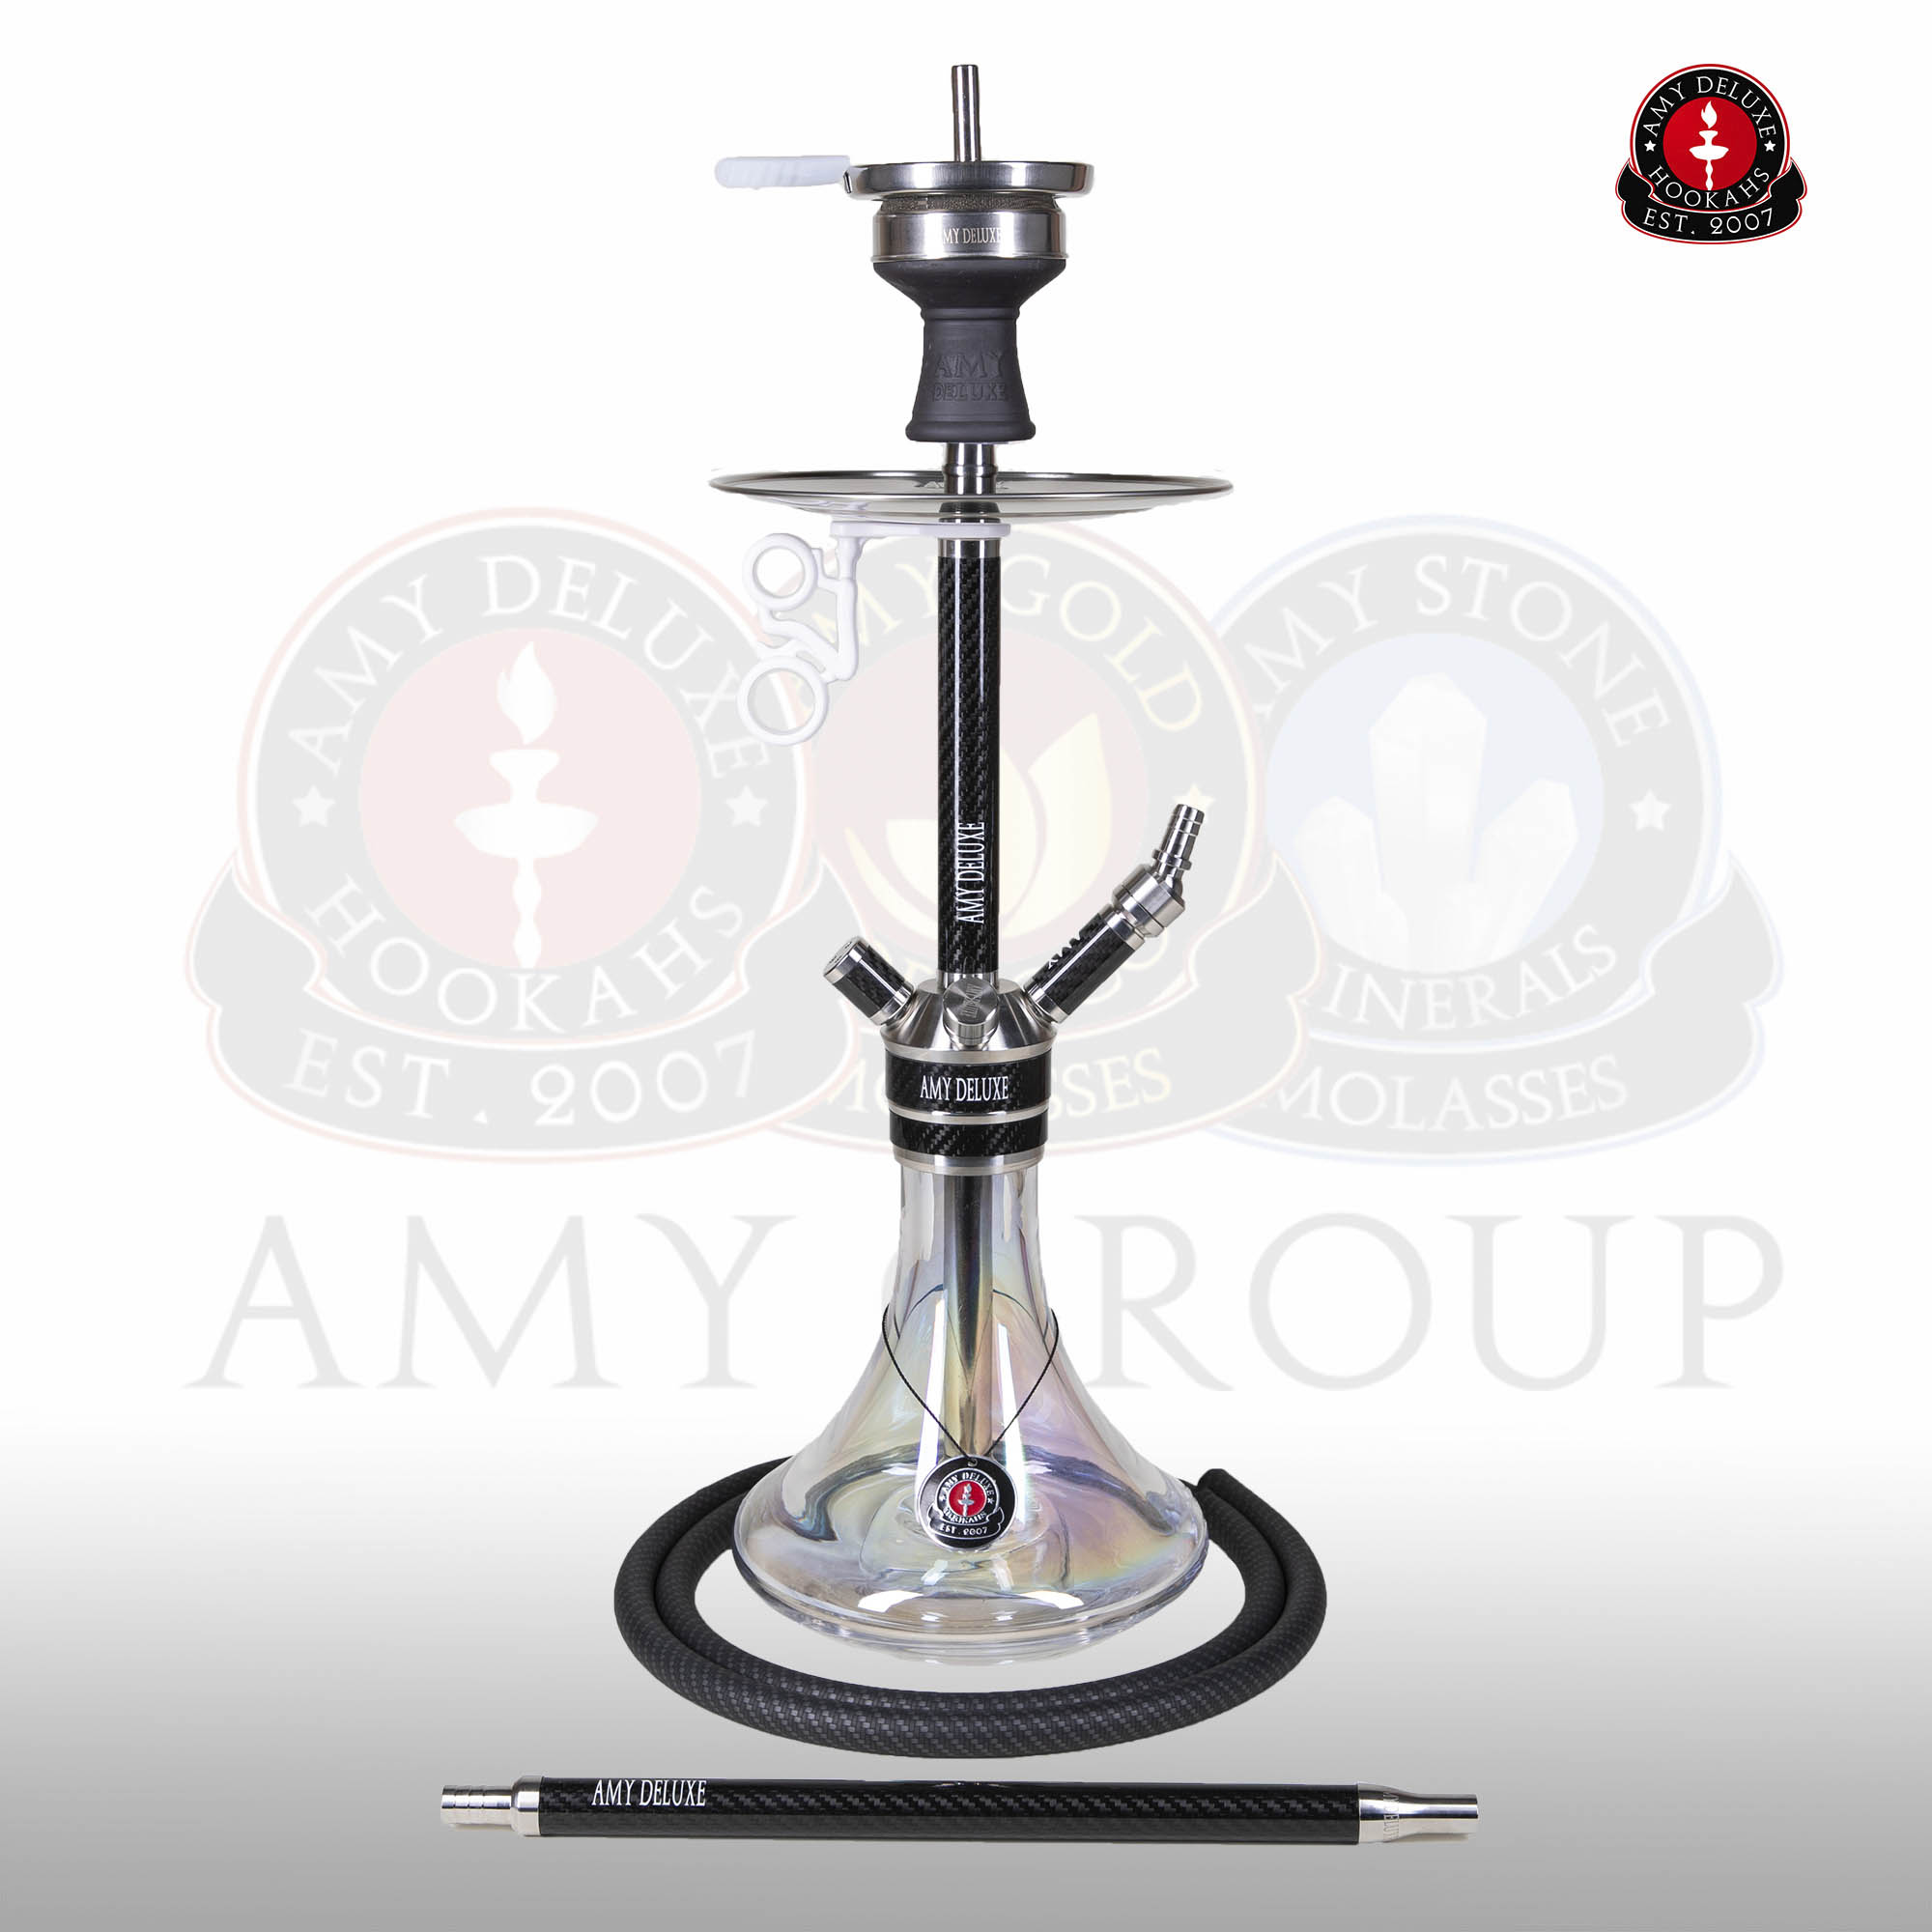 Amy Deluxe Carbonica Force rs SS21.2